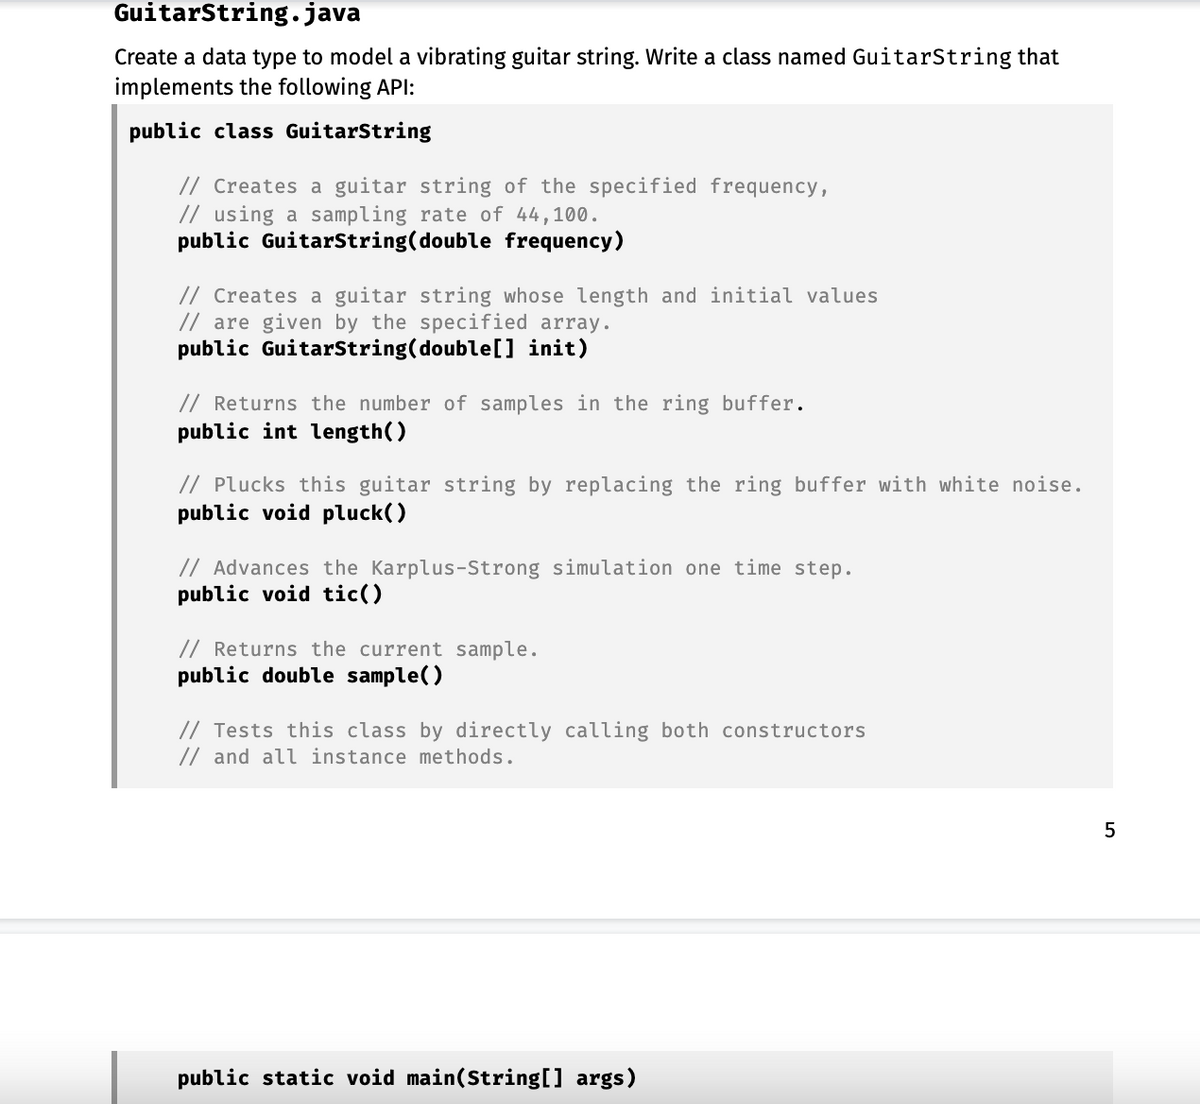 GuitarString.java
Create a data type to model a vibrating guitar string. Write a class named GuitarString that
implements the following API:
public class GuitarString
// Creates a guitar string of the specified frequency,
// using a sampling rate of 44,100.
public GuitarString(double frequency)
// Creates a guitar string whose length and initial values
// are given by the specified array.
public GuitarString(double[] init)
// Returns the number of samples in the ring buffer.
public int length()
// Plucks this guitar string by replacing the ring buffer with white noise.
public void pluck()
// Advances the Karplus-Strong simulation one time step.
public void tic()
// Returns the current sample.
public double sample()
// Tests this class by directly calling both constructors
// and all instance methods.
public static void main(String[] args)
